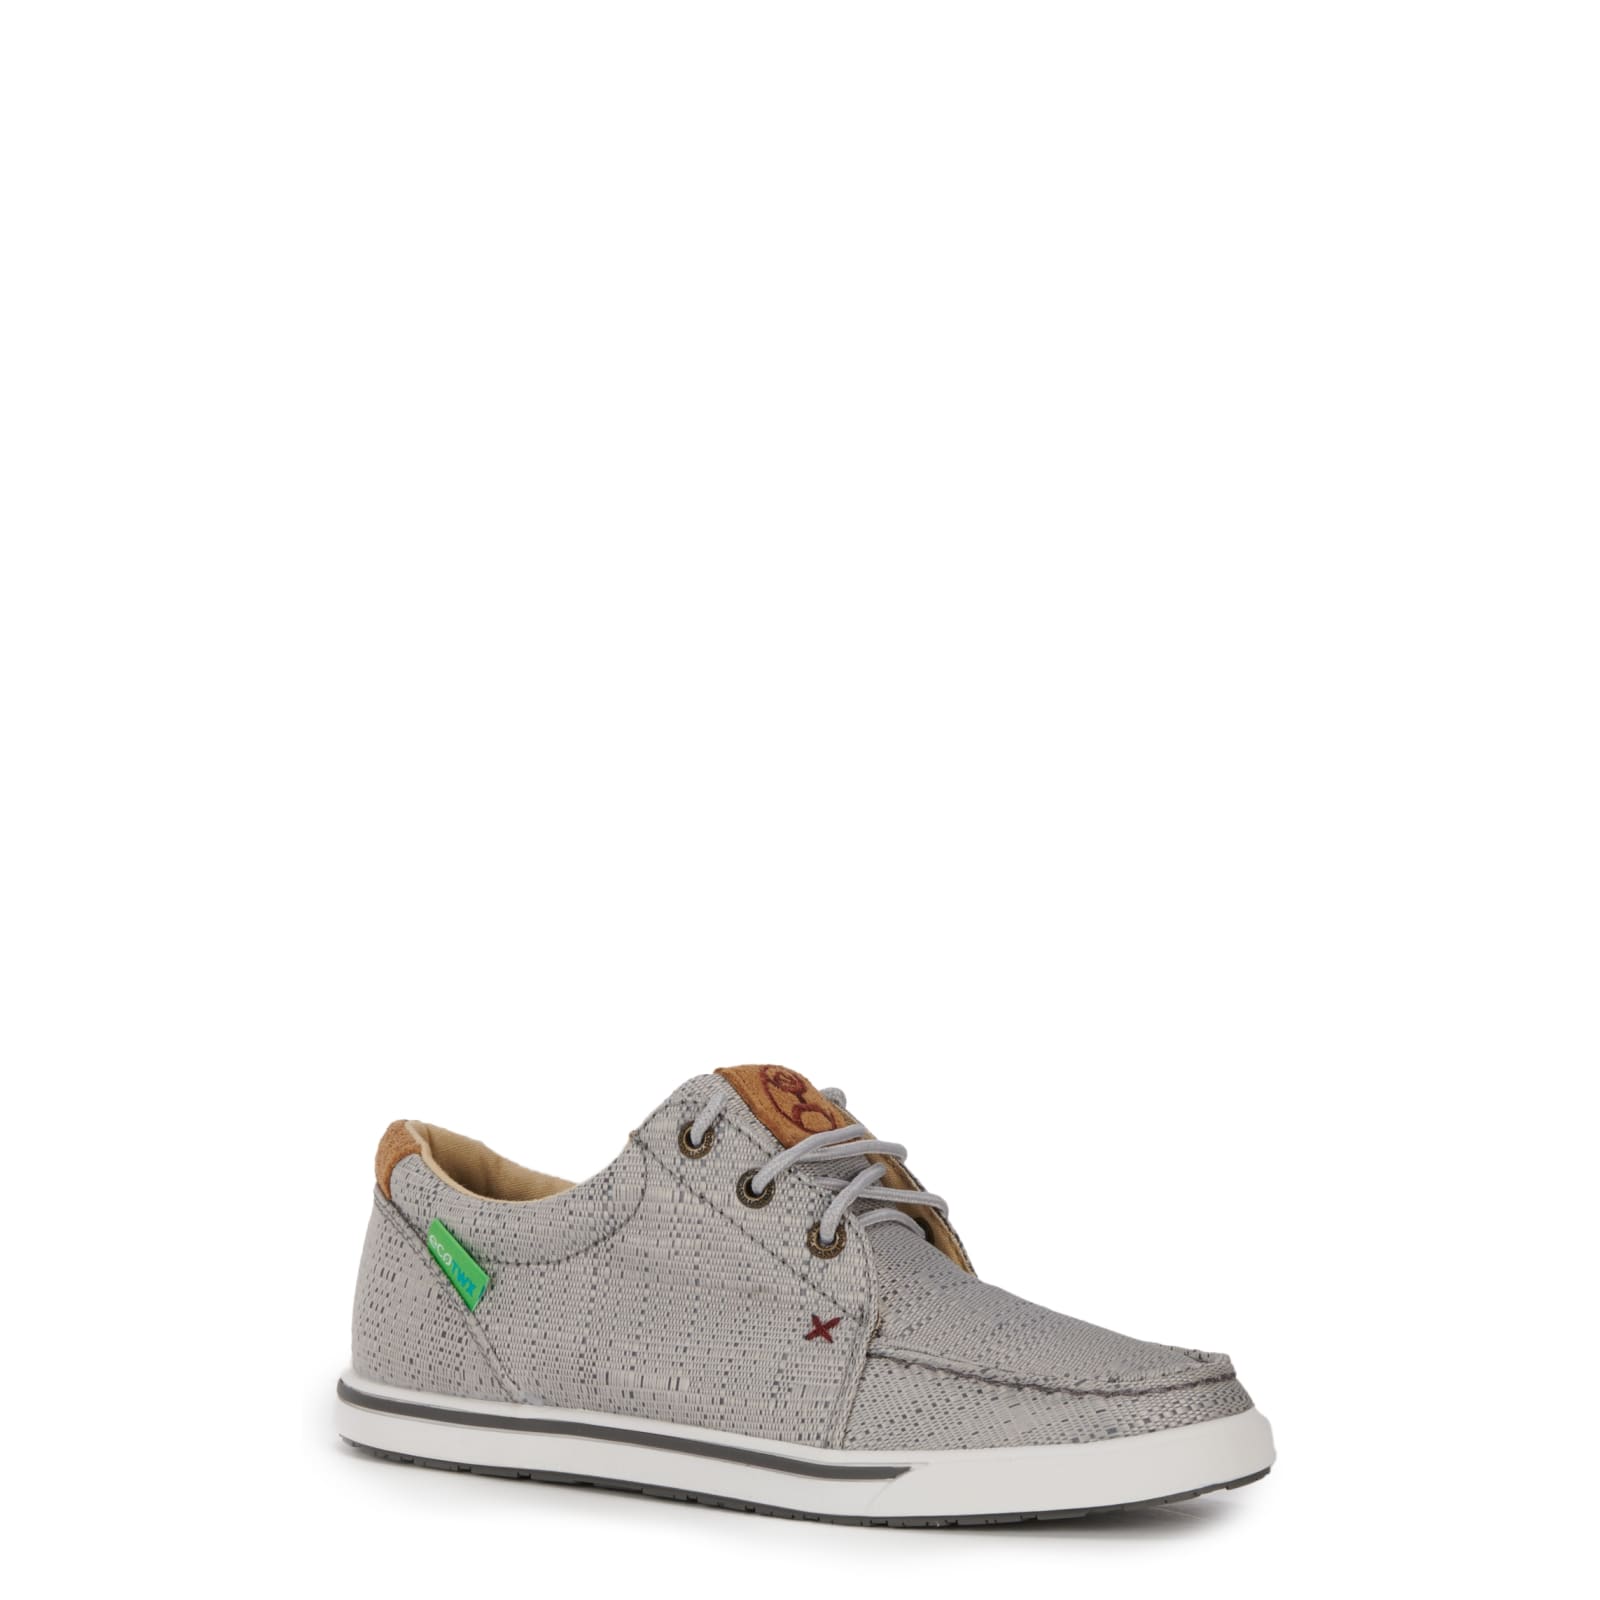 ventilatie minstens Handel Twisted X Women's Hooey Loper Light Grey Fabric Lace Up Sneakers Casual  Shoe available at Cavenders